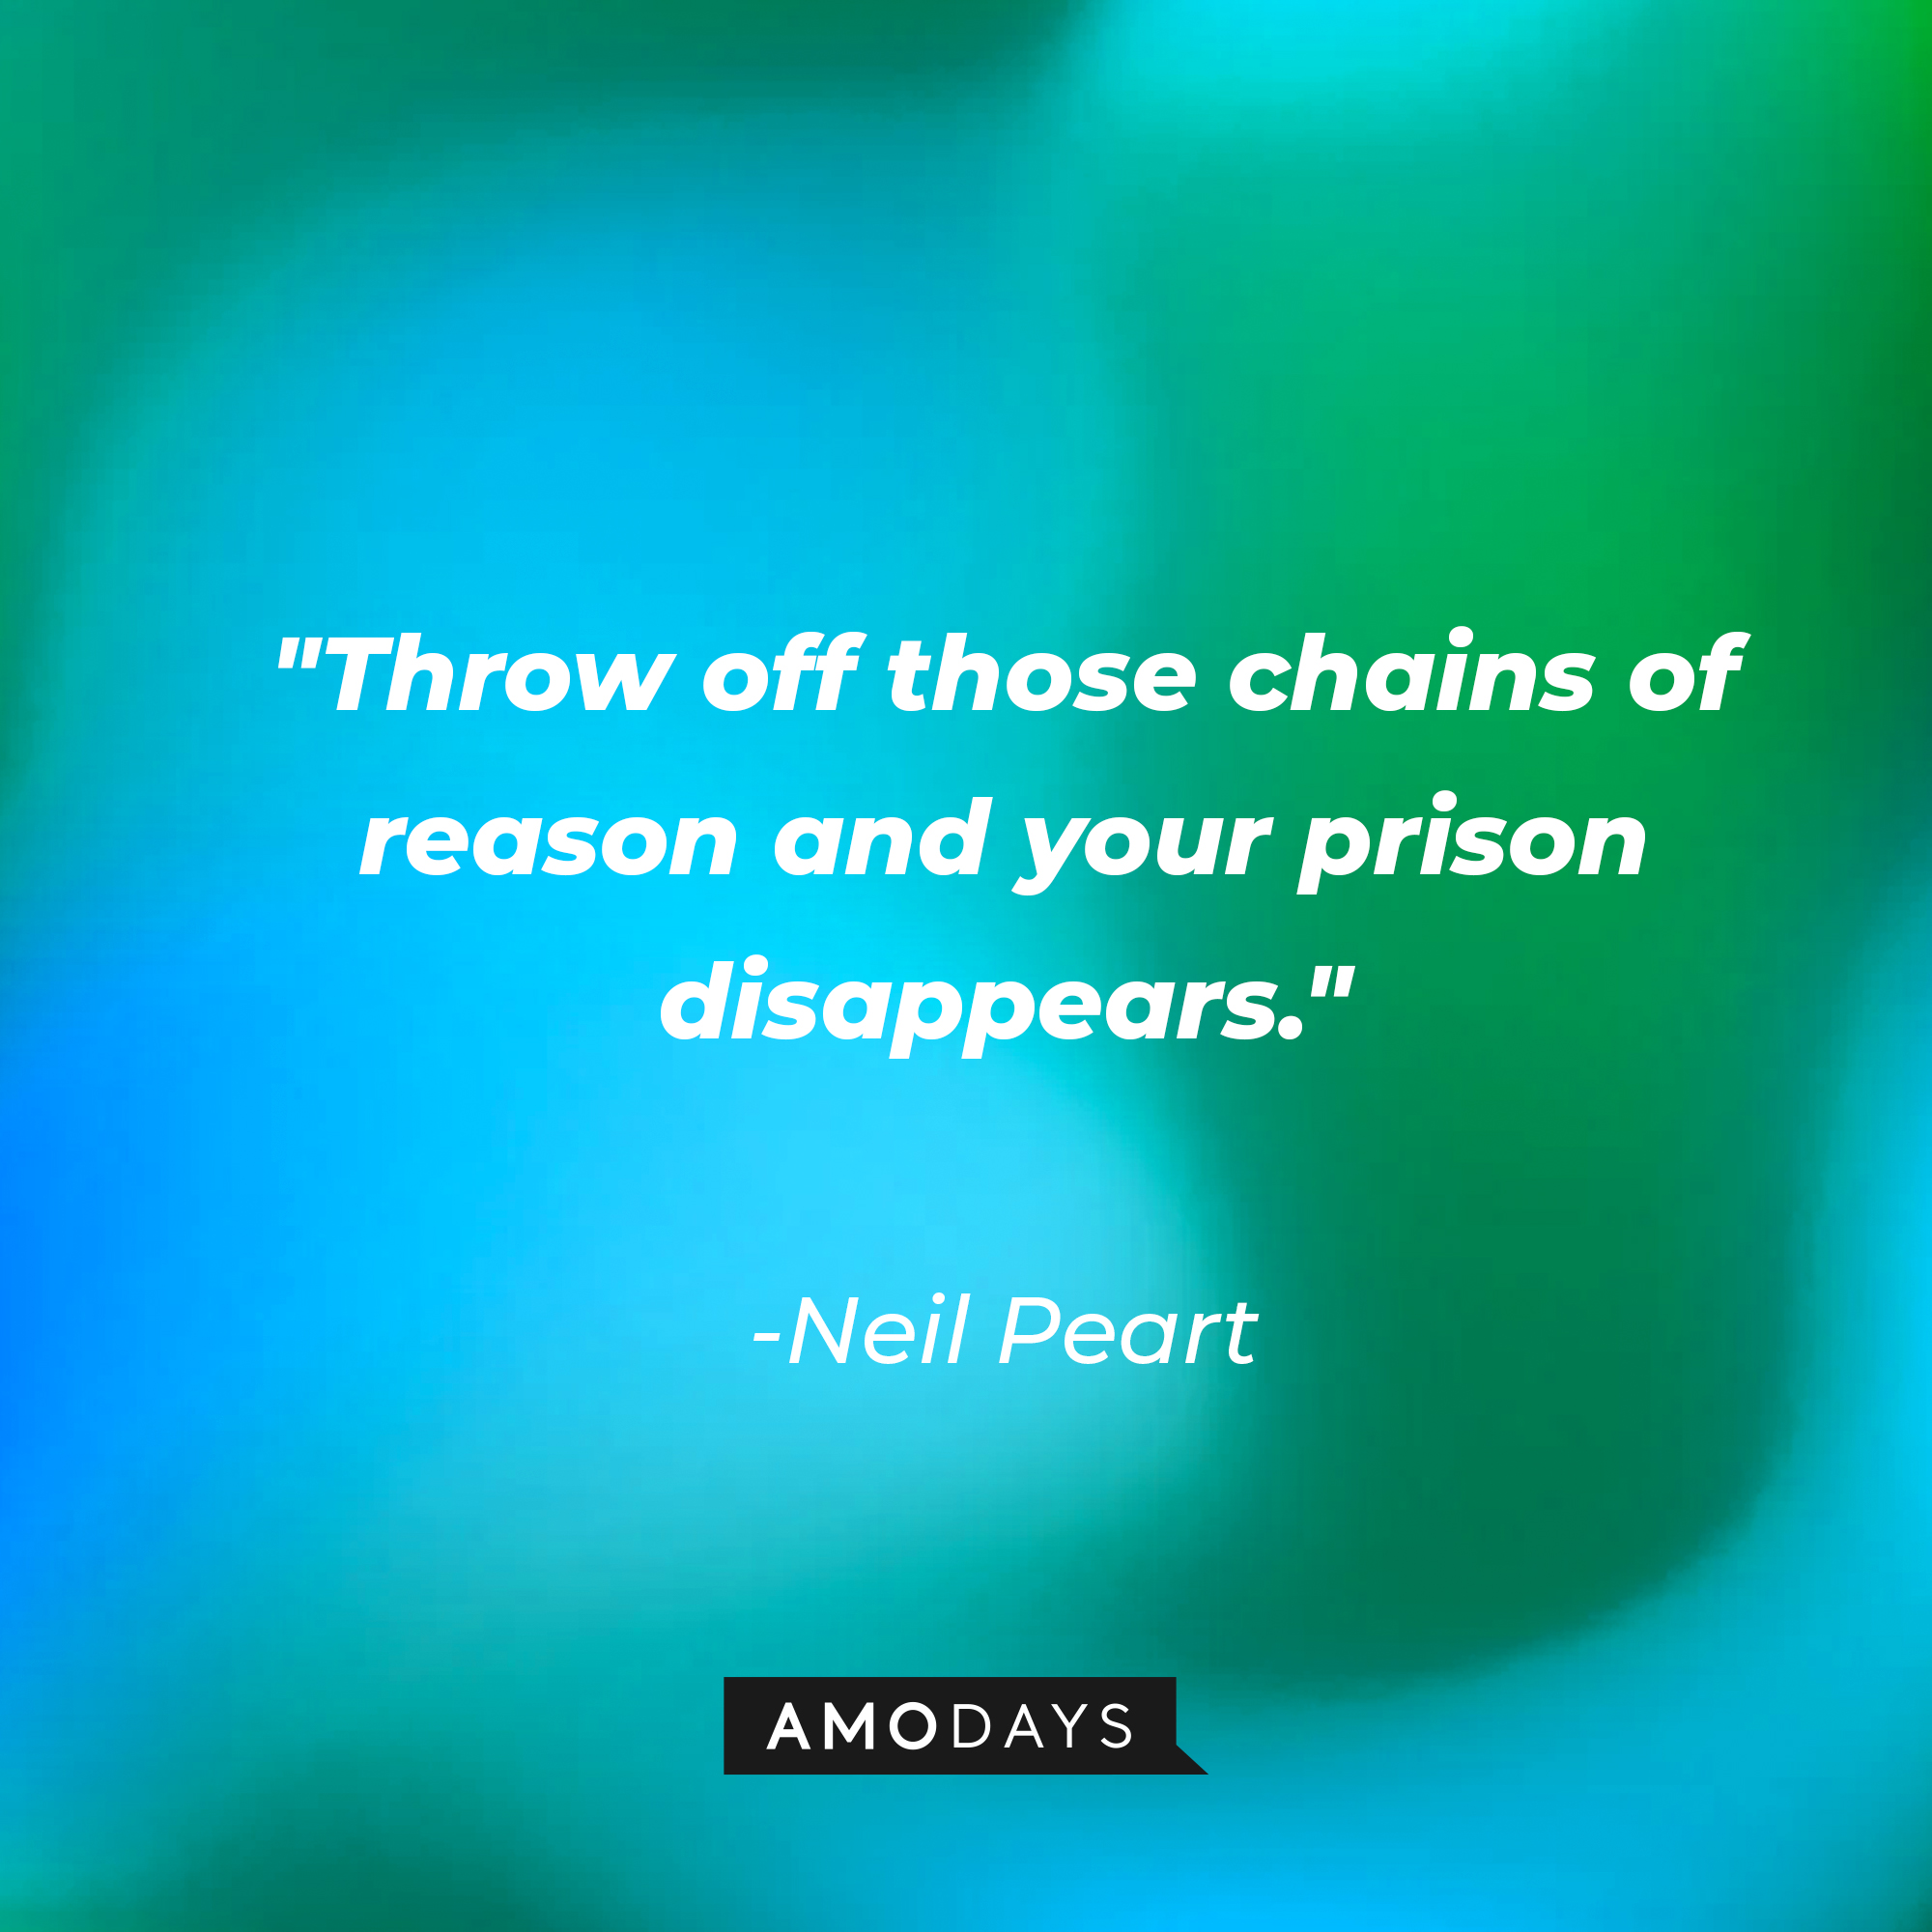 Neil Peart's quote: "Throw off those chains of reason and your prison disappears." | Image: AmoDays